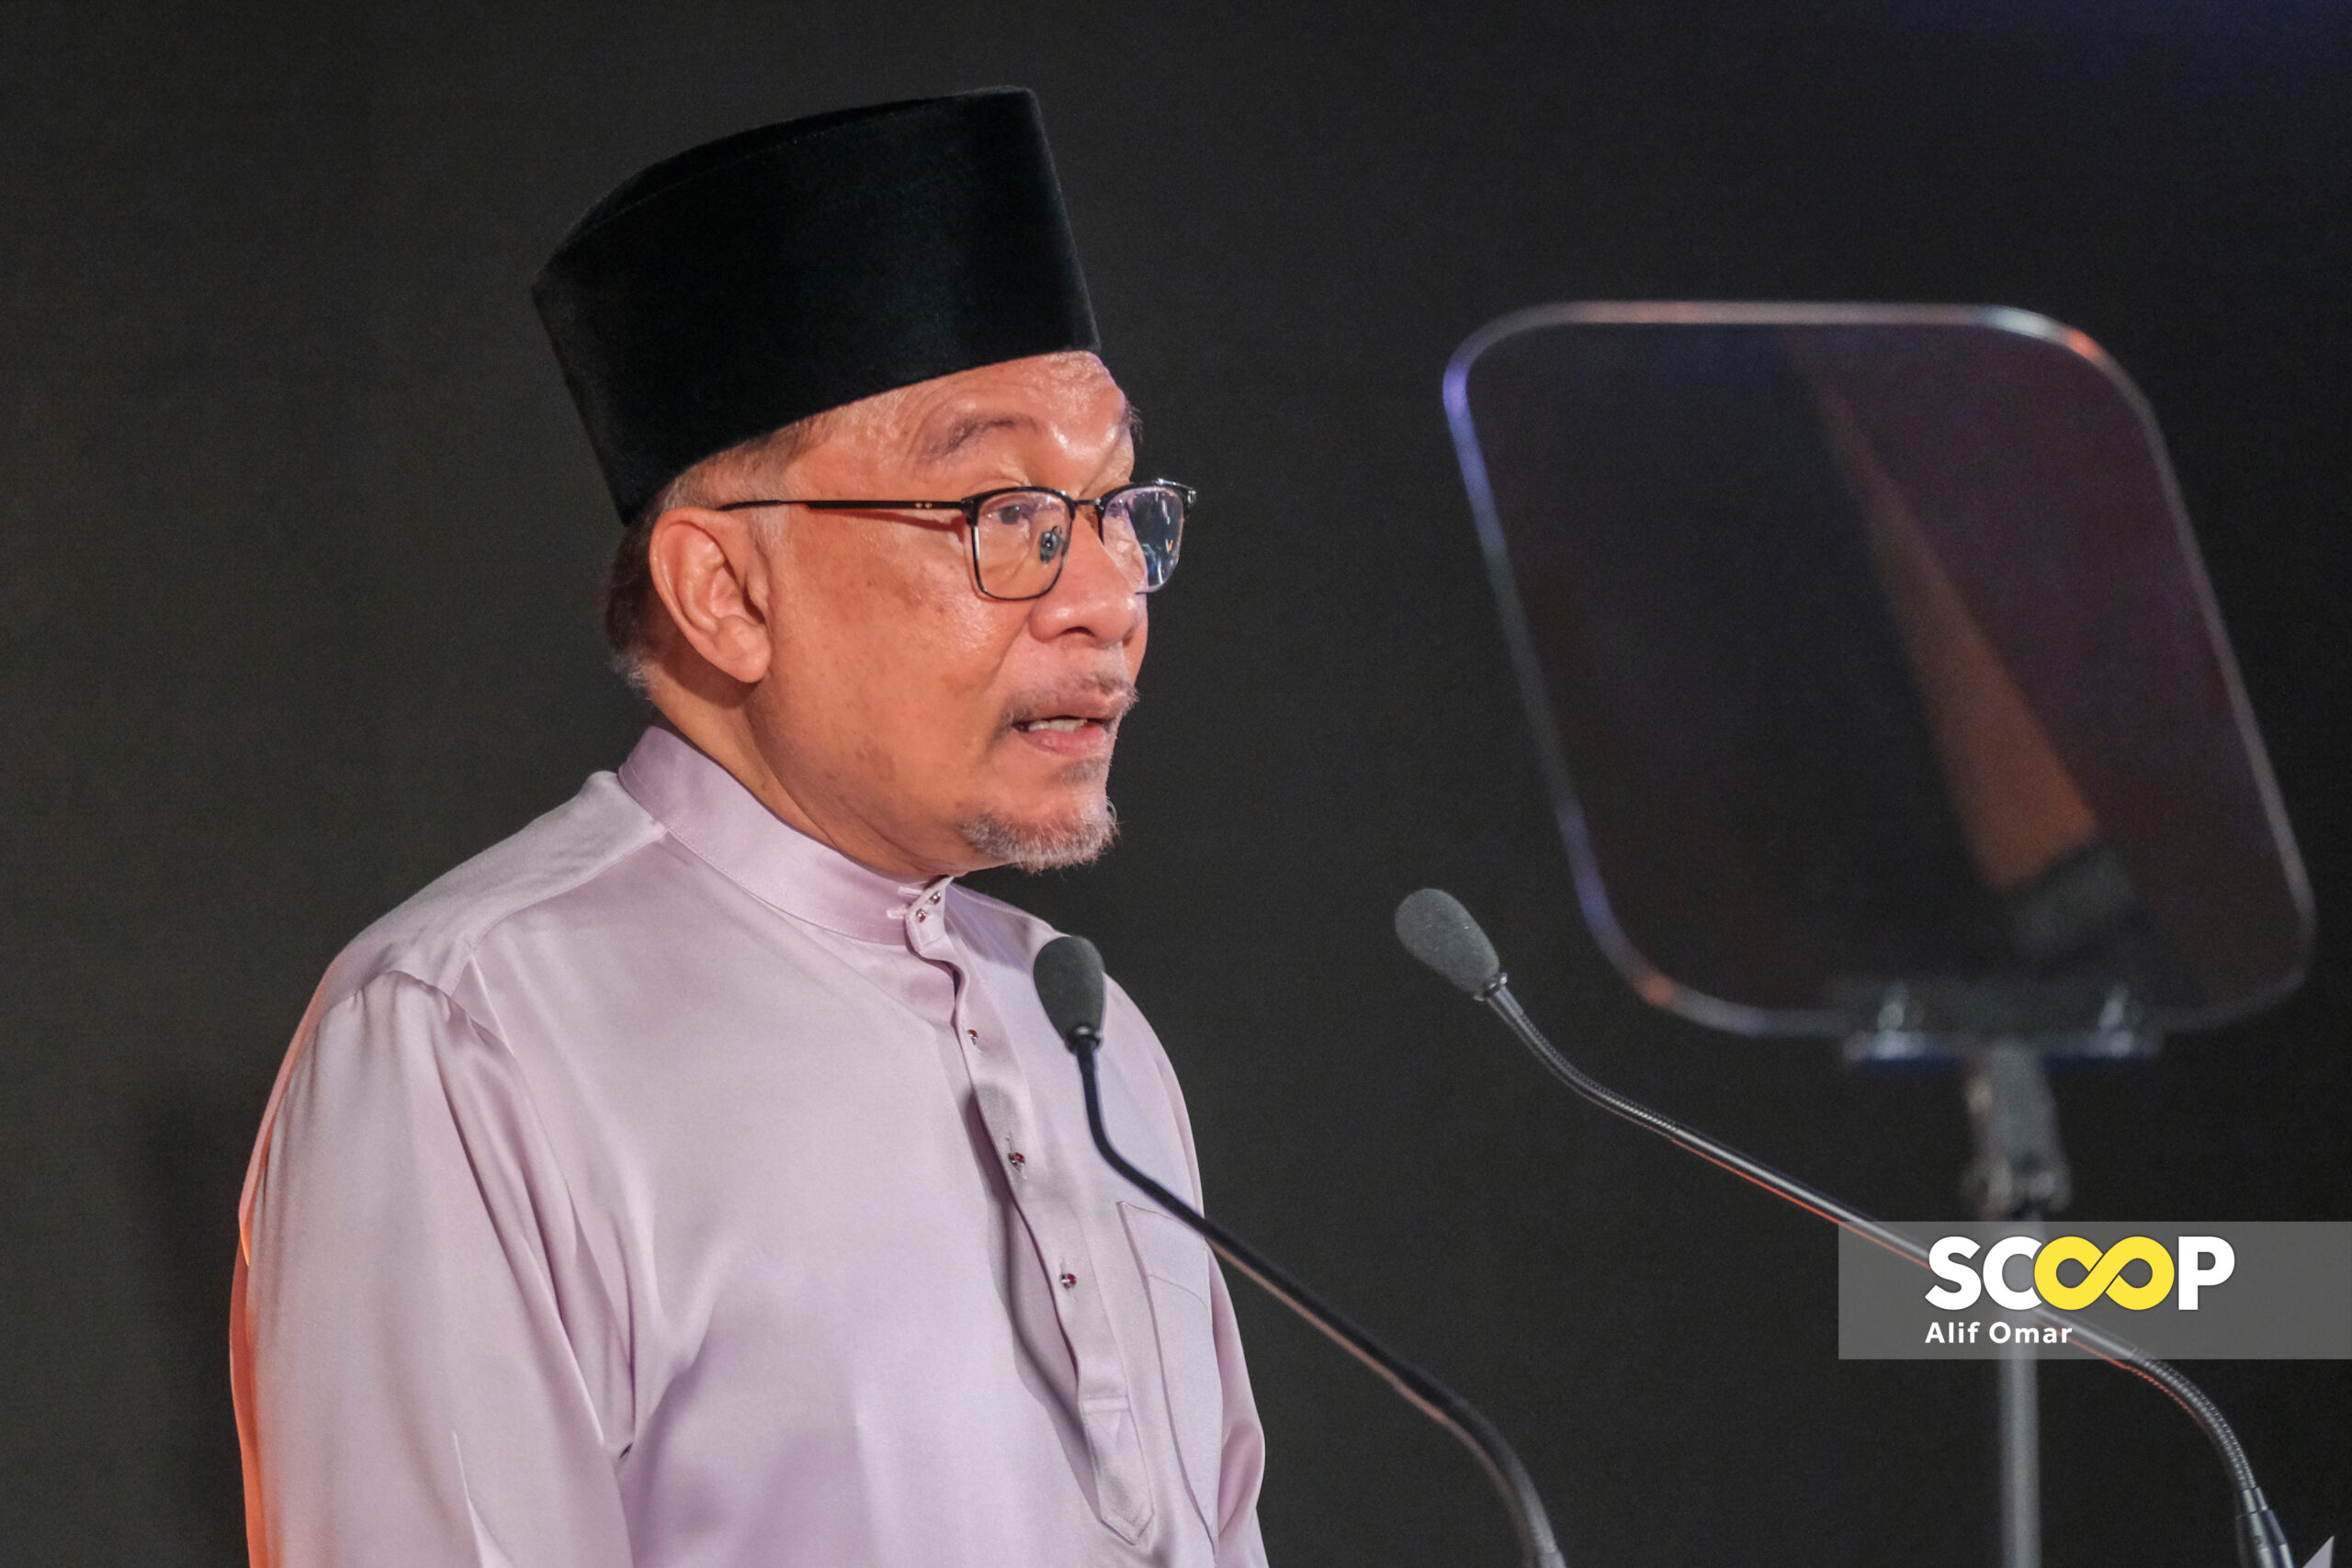 We’re not ignoring the ringgit: Anwar highlights record RM329.5 bil investment in M'sia